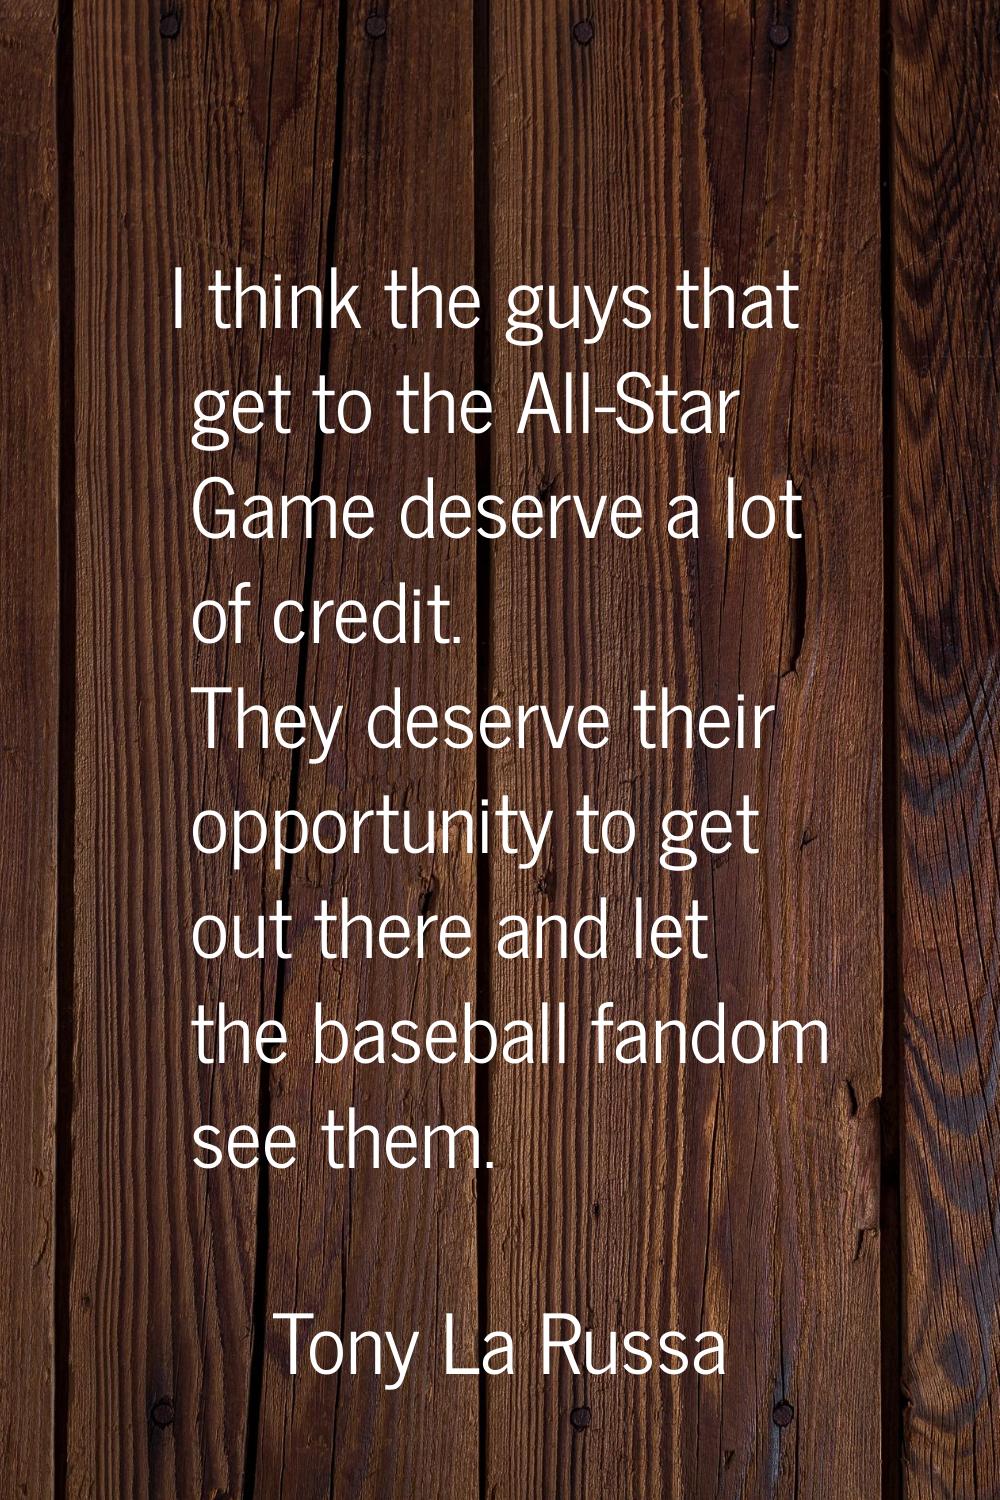 I think the guys that get to the All-Star Game deserve a lot of credit. They deserve their opportun